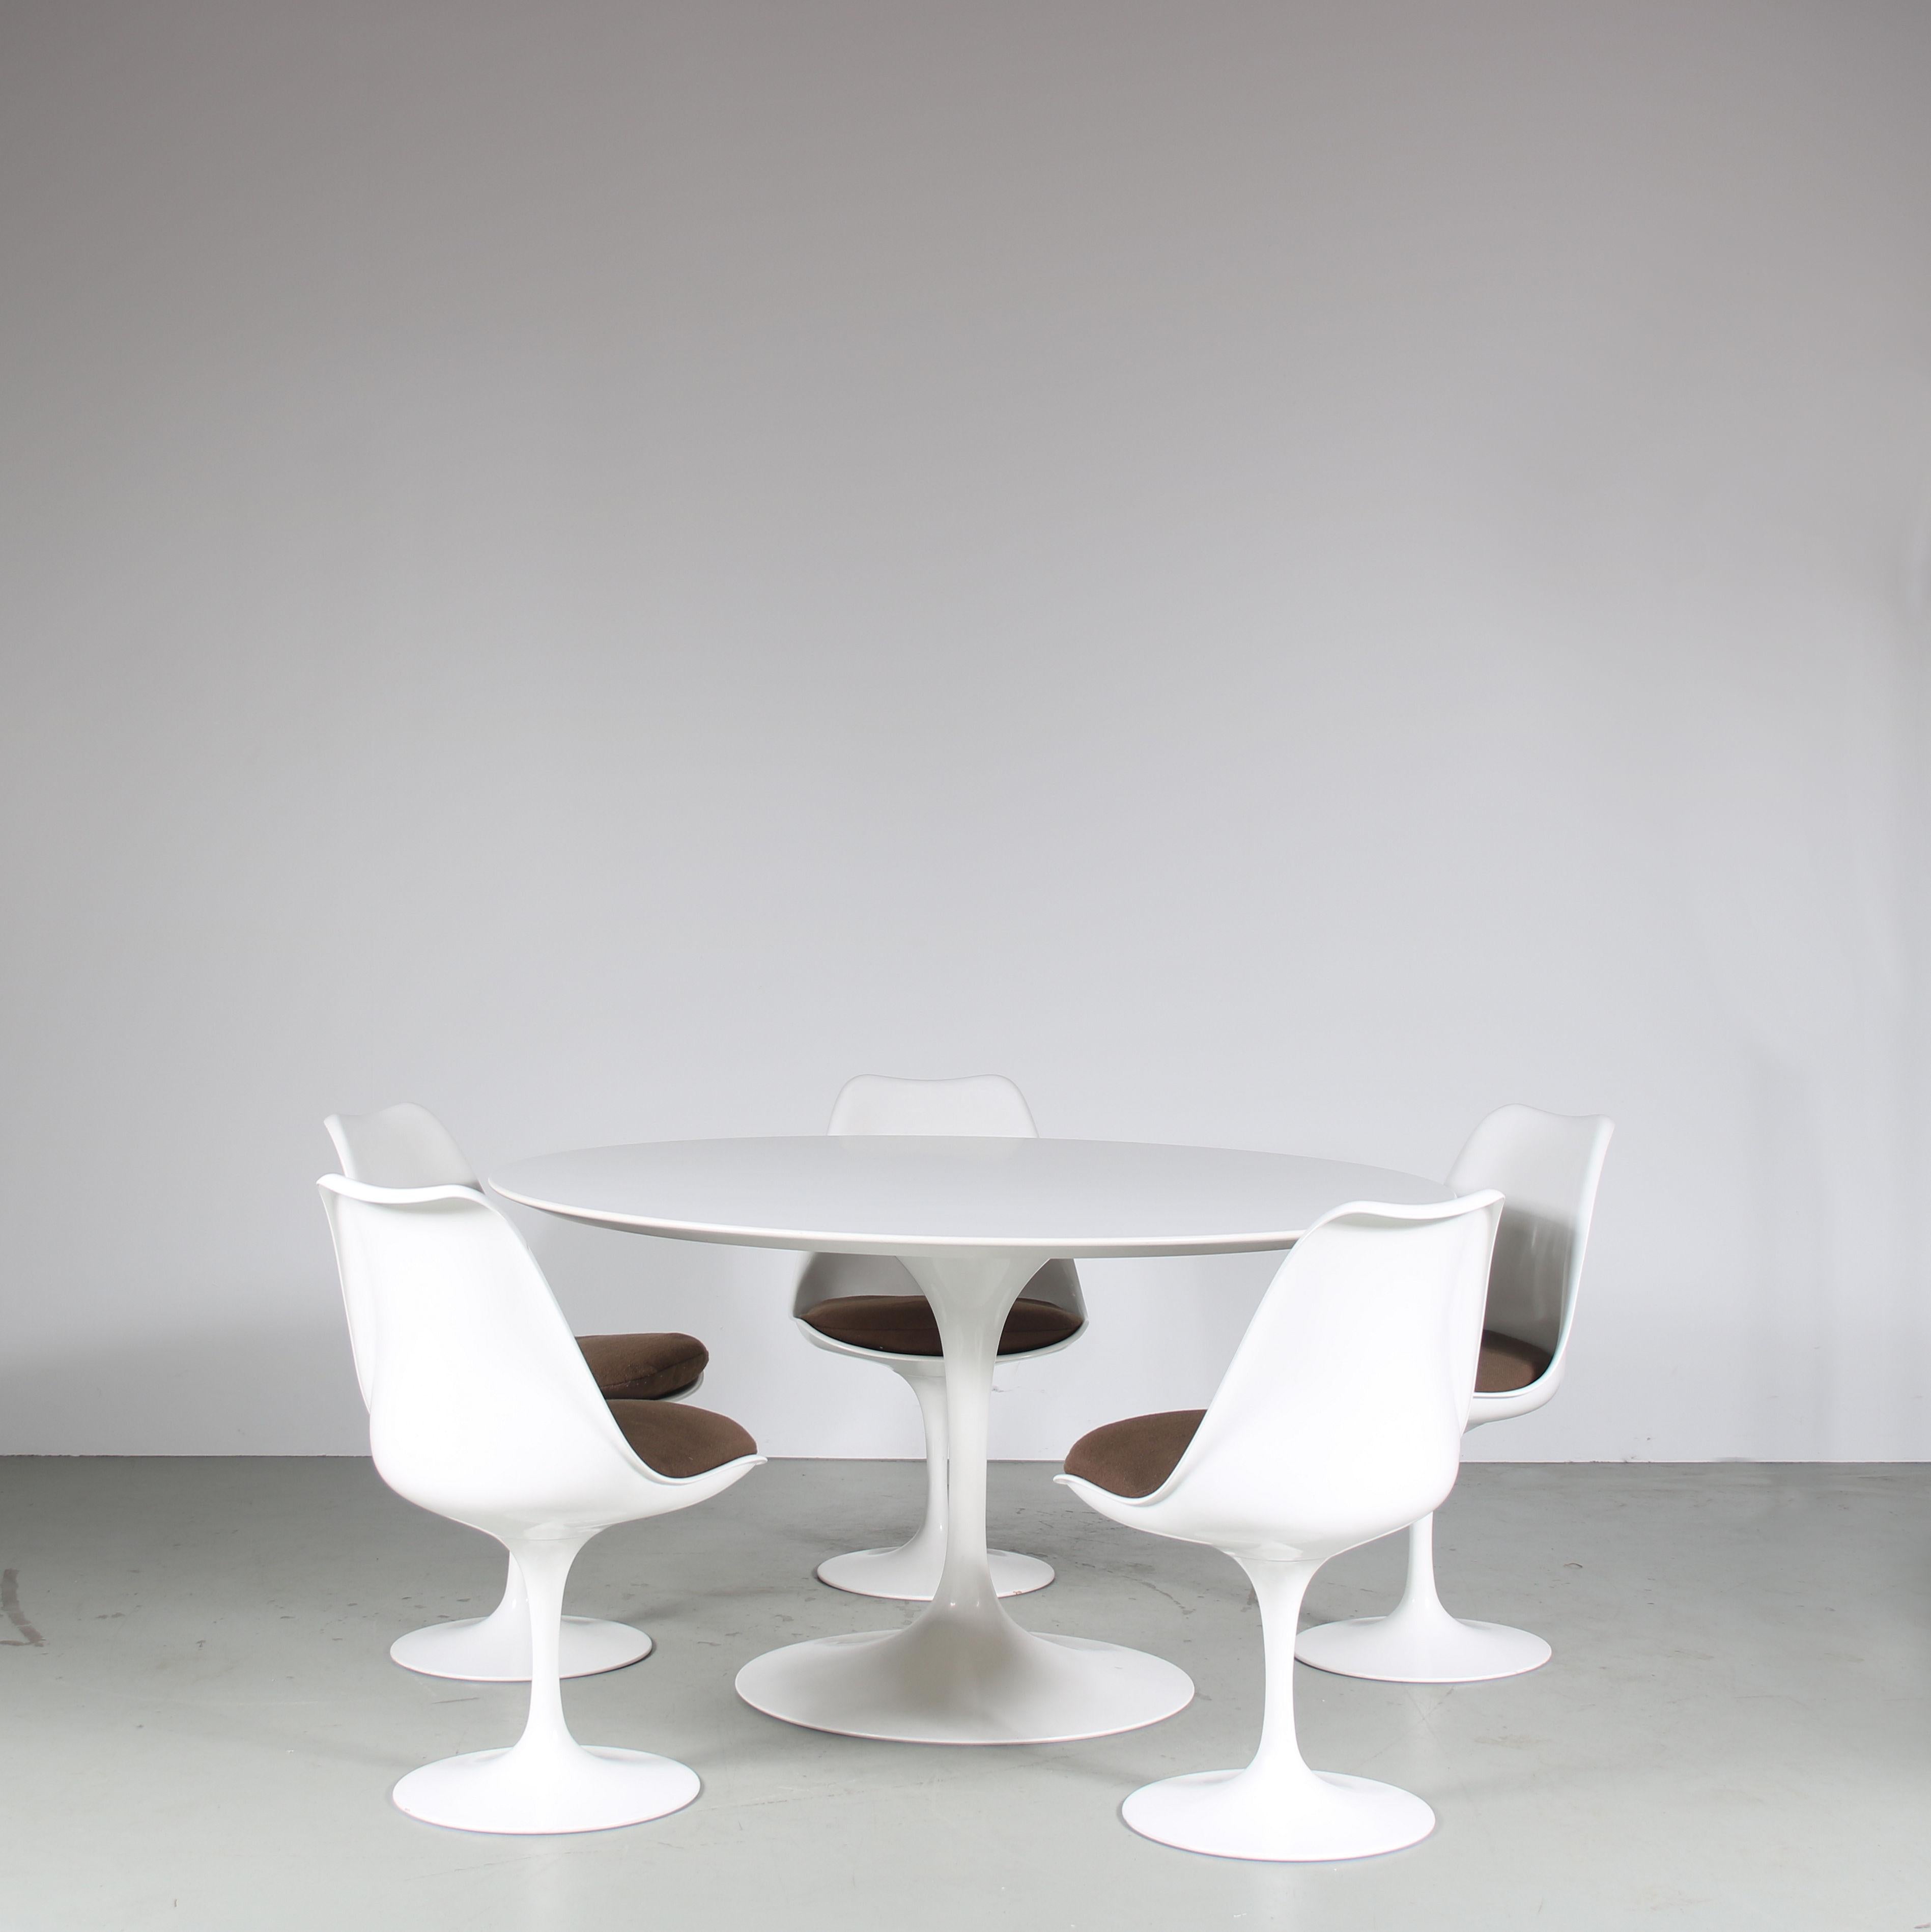 This set of five swivel dining chairs with matching dining table is a true icon of mid-century modern design, designed by Eero Saarinen and manufactured by Knoll International in the 1960s.

The chairs feature a modern and minimalist tulip base in